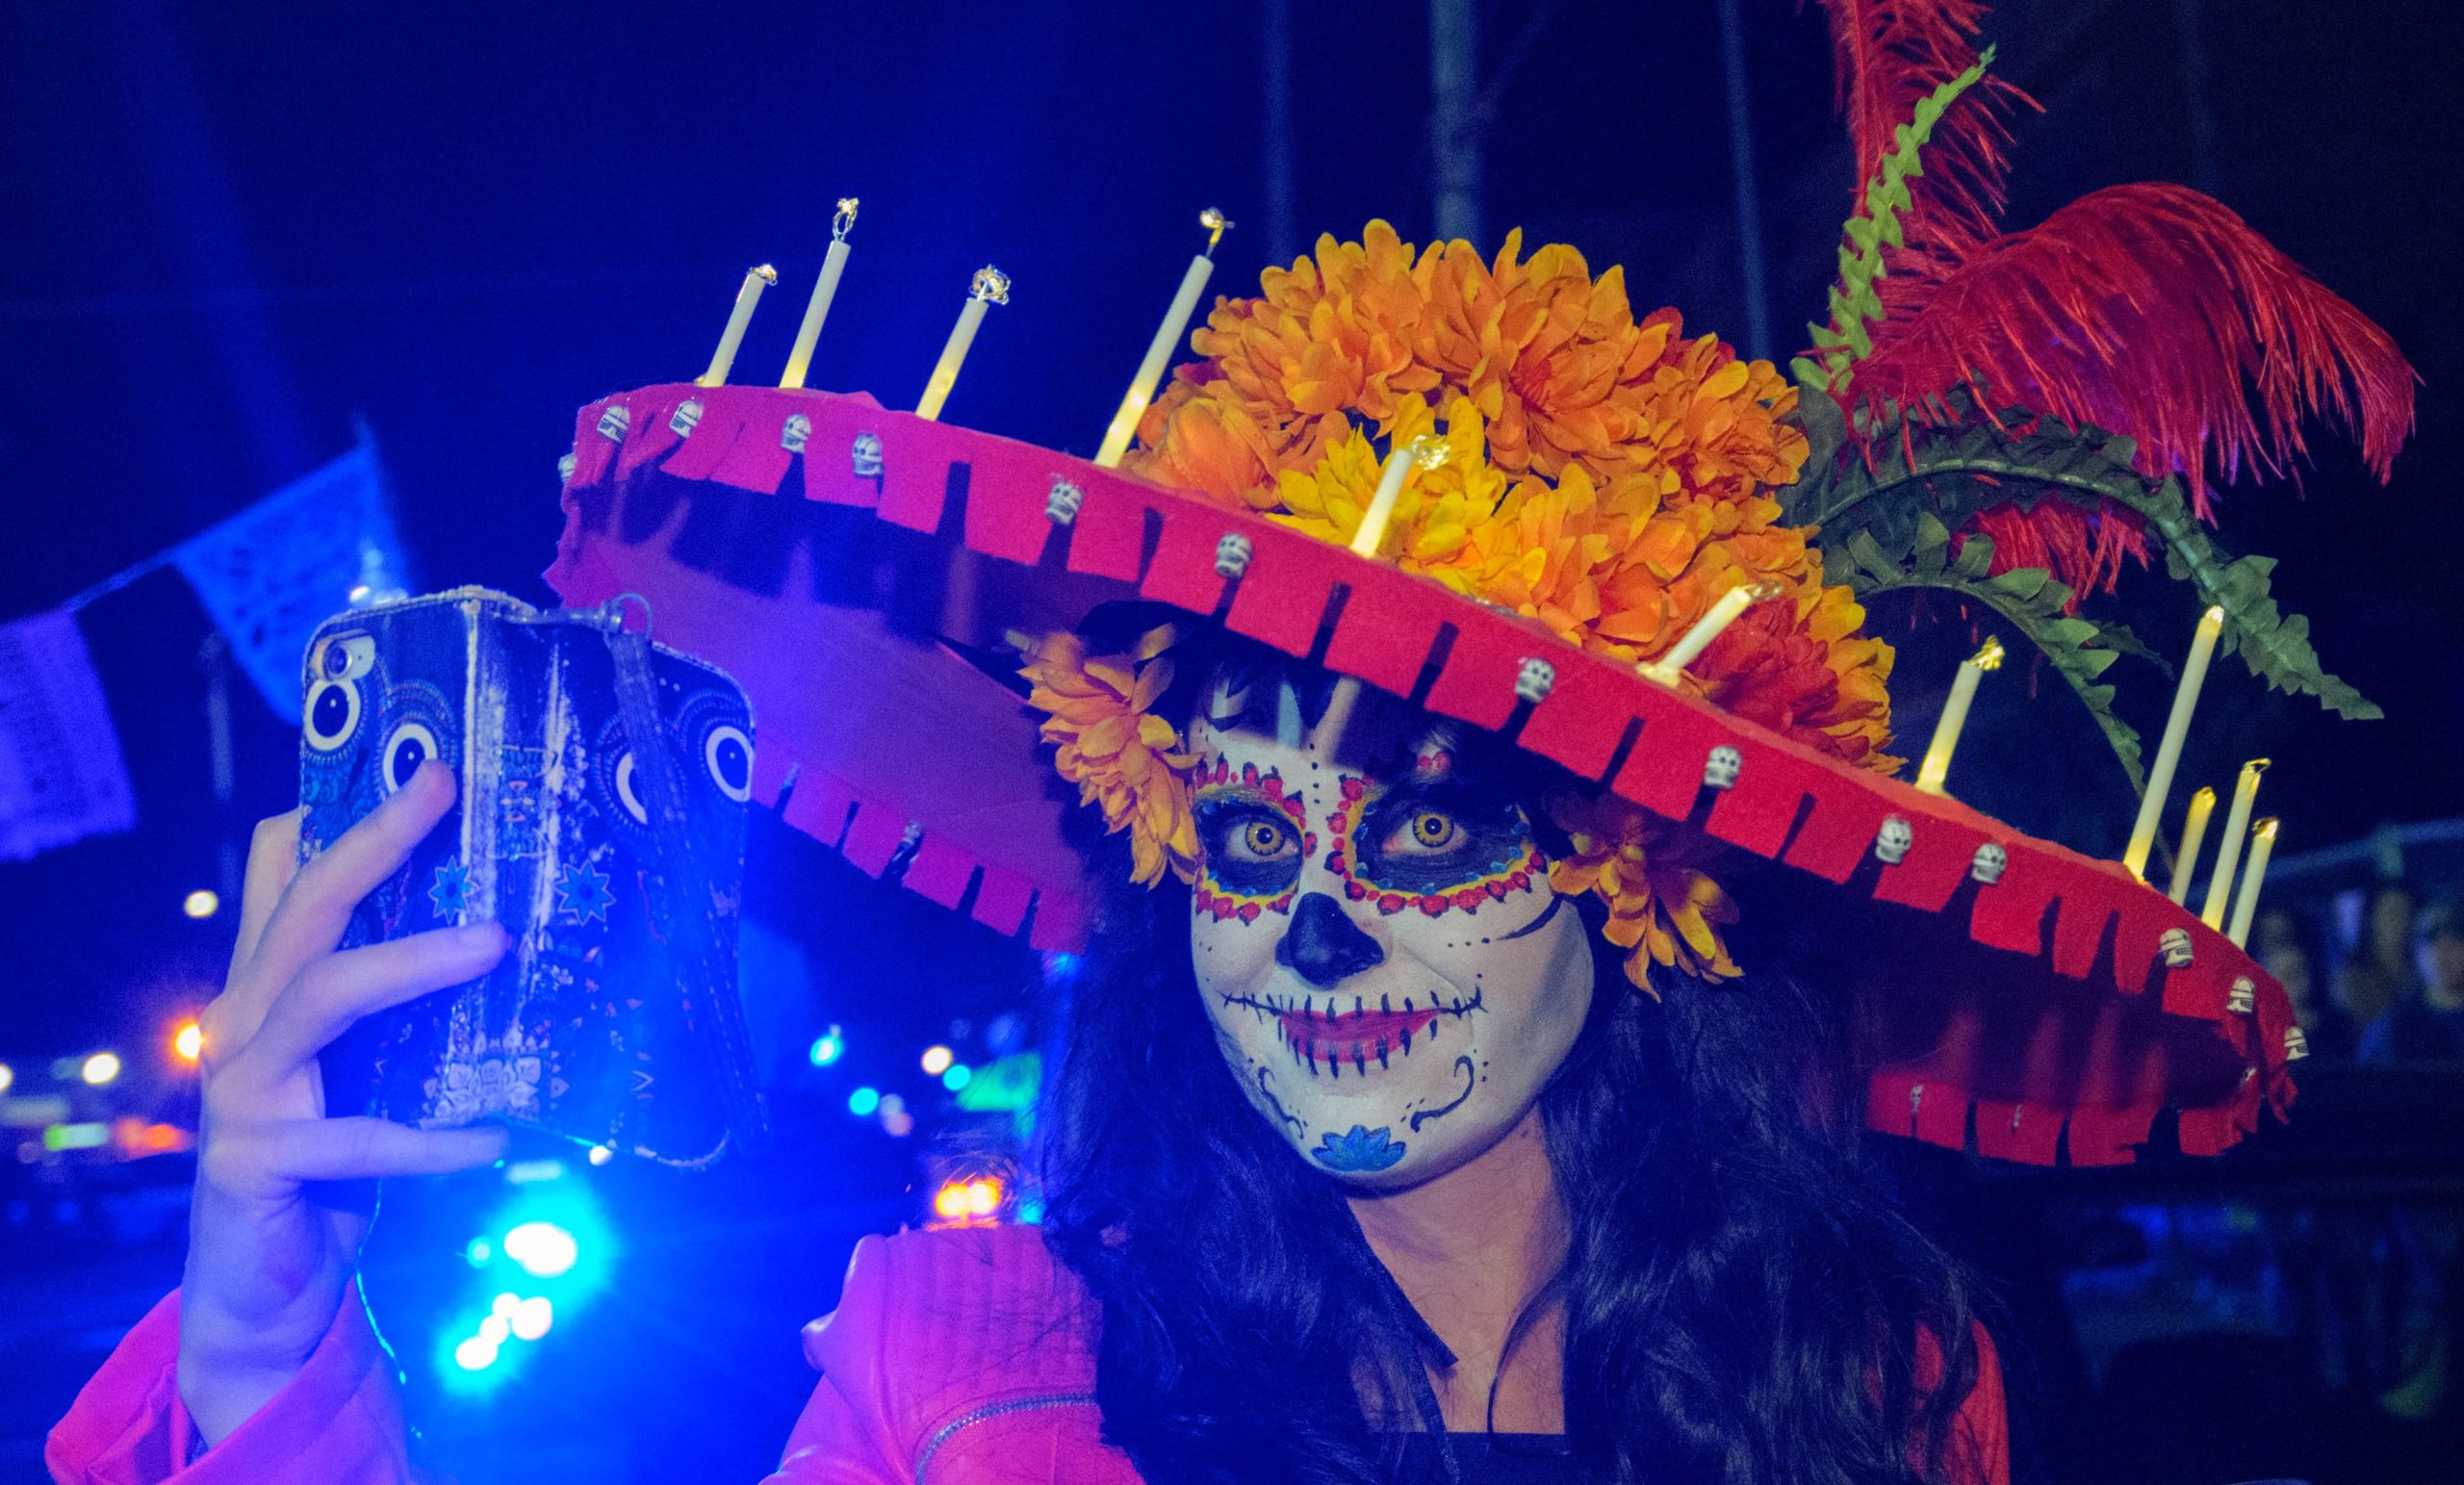 Krewe de Mayahuel parades in the St. Roch neighborhood from Carnaval Lounge to St. Roch Cemetery as part of a Day of the Dead procession to remember and celebrate loved ones who have passed in New Orleans, Louisiana Saturday, November 2, 2019. Mayahuel is named after the Aztec goddess of agave, the plant used to make tequila. The group was founded by Mexican immigrants including Roberto Carrillo, a native of Mexico City who moved to New Orleans along with other Mexican immigrant construction workers after Hurricane Katrina. Drum groups including Skinz N Bonez and Bloco Jacaré, a Brazilian group from Baton Rouge which means alligator in Portuguese, accompanied the krewe. Photo by Matthew Hinton